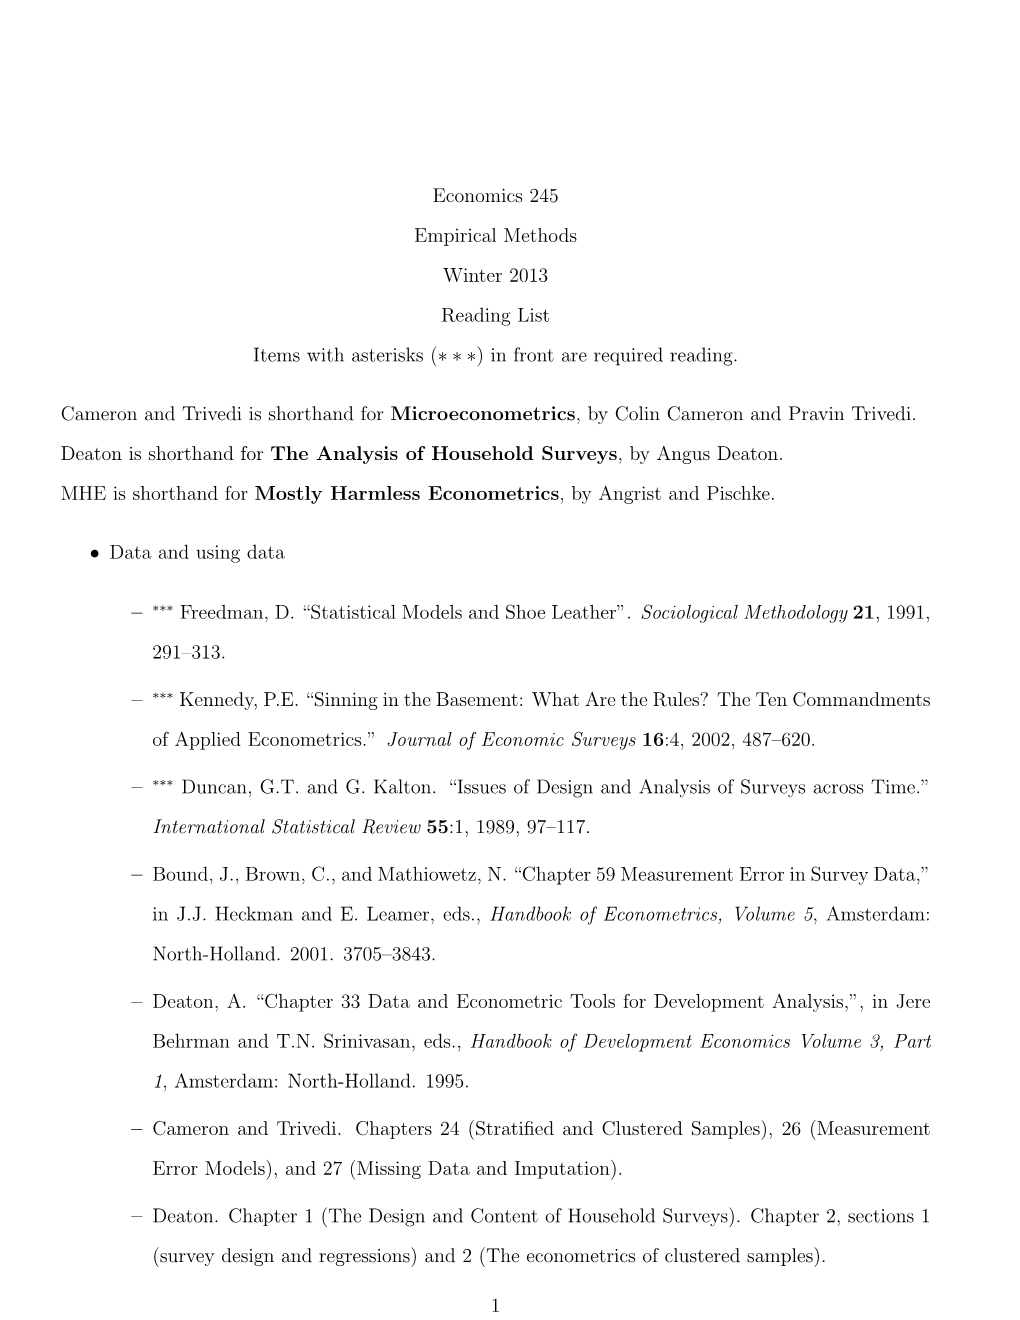 Economics 245 Empirical Methods Winter 2013 Reading List Items with Asterisks (∗ ∗ ∗) in Front Are Required Reading